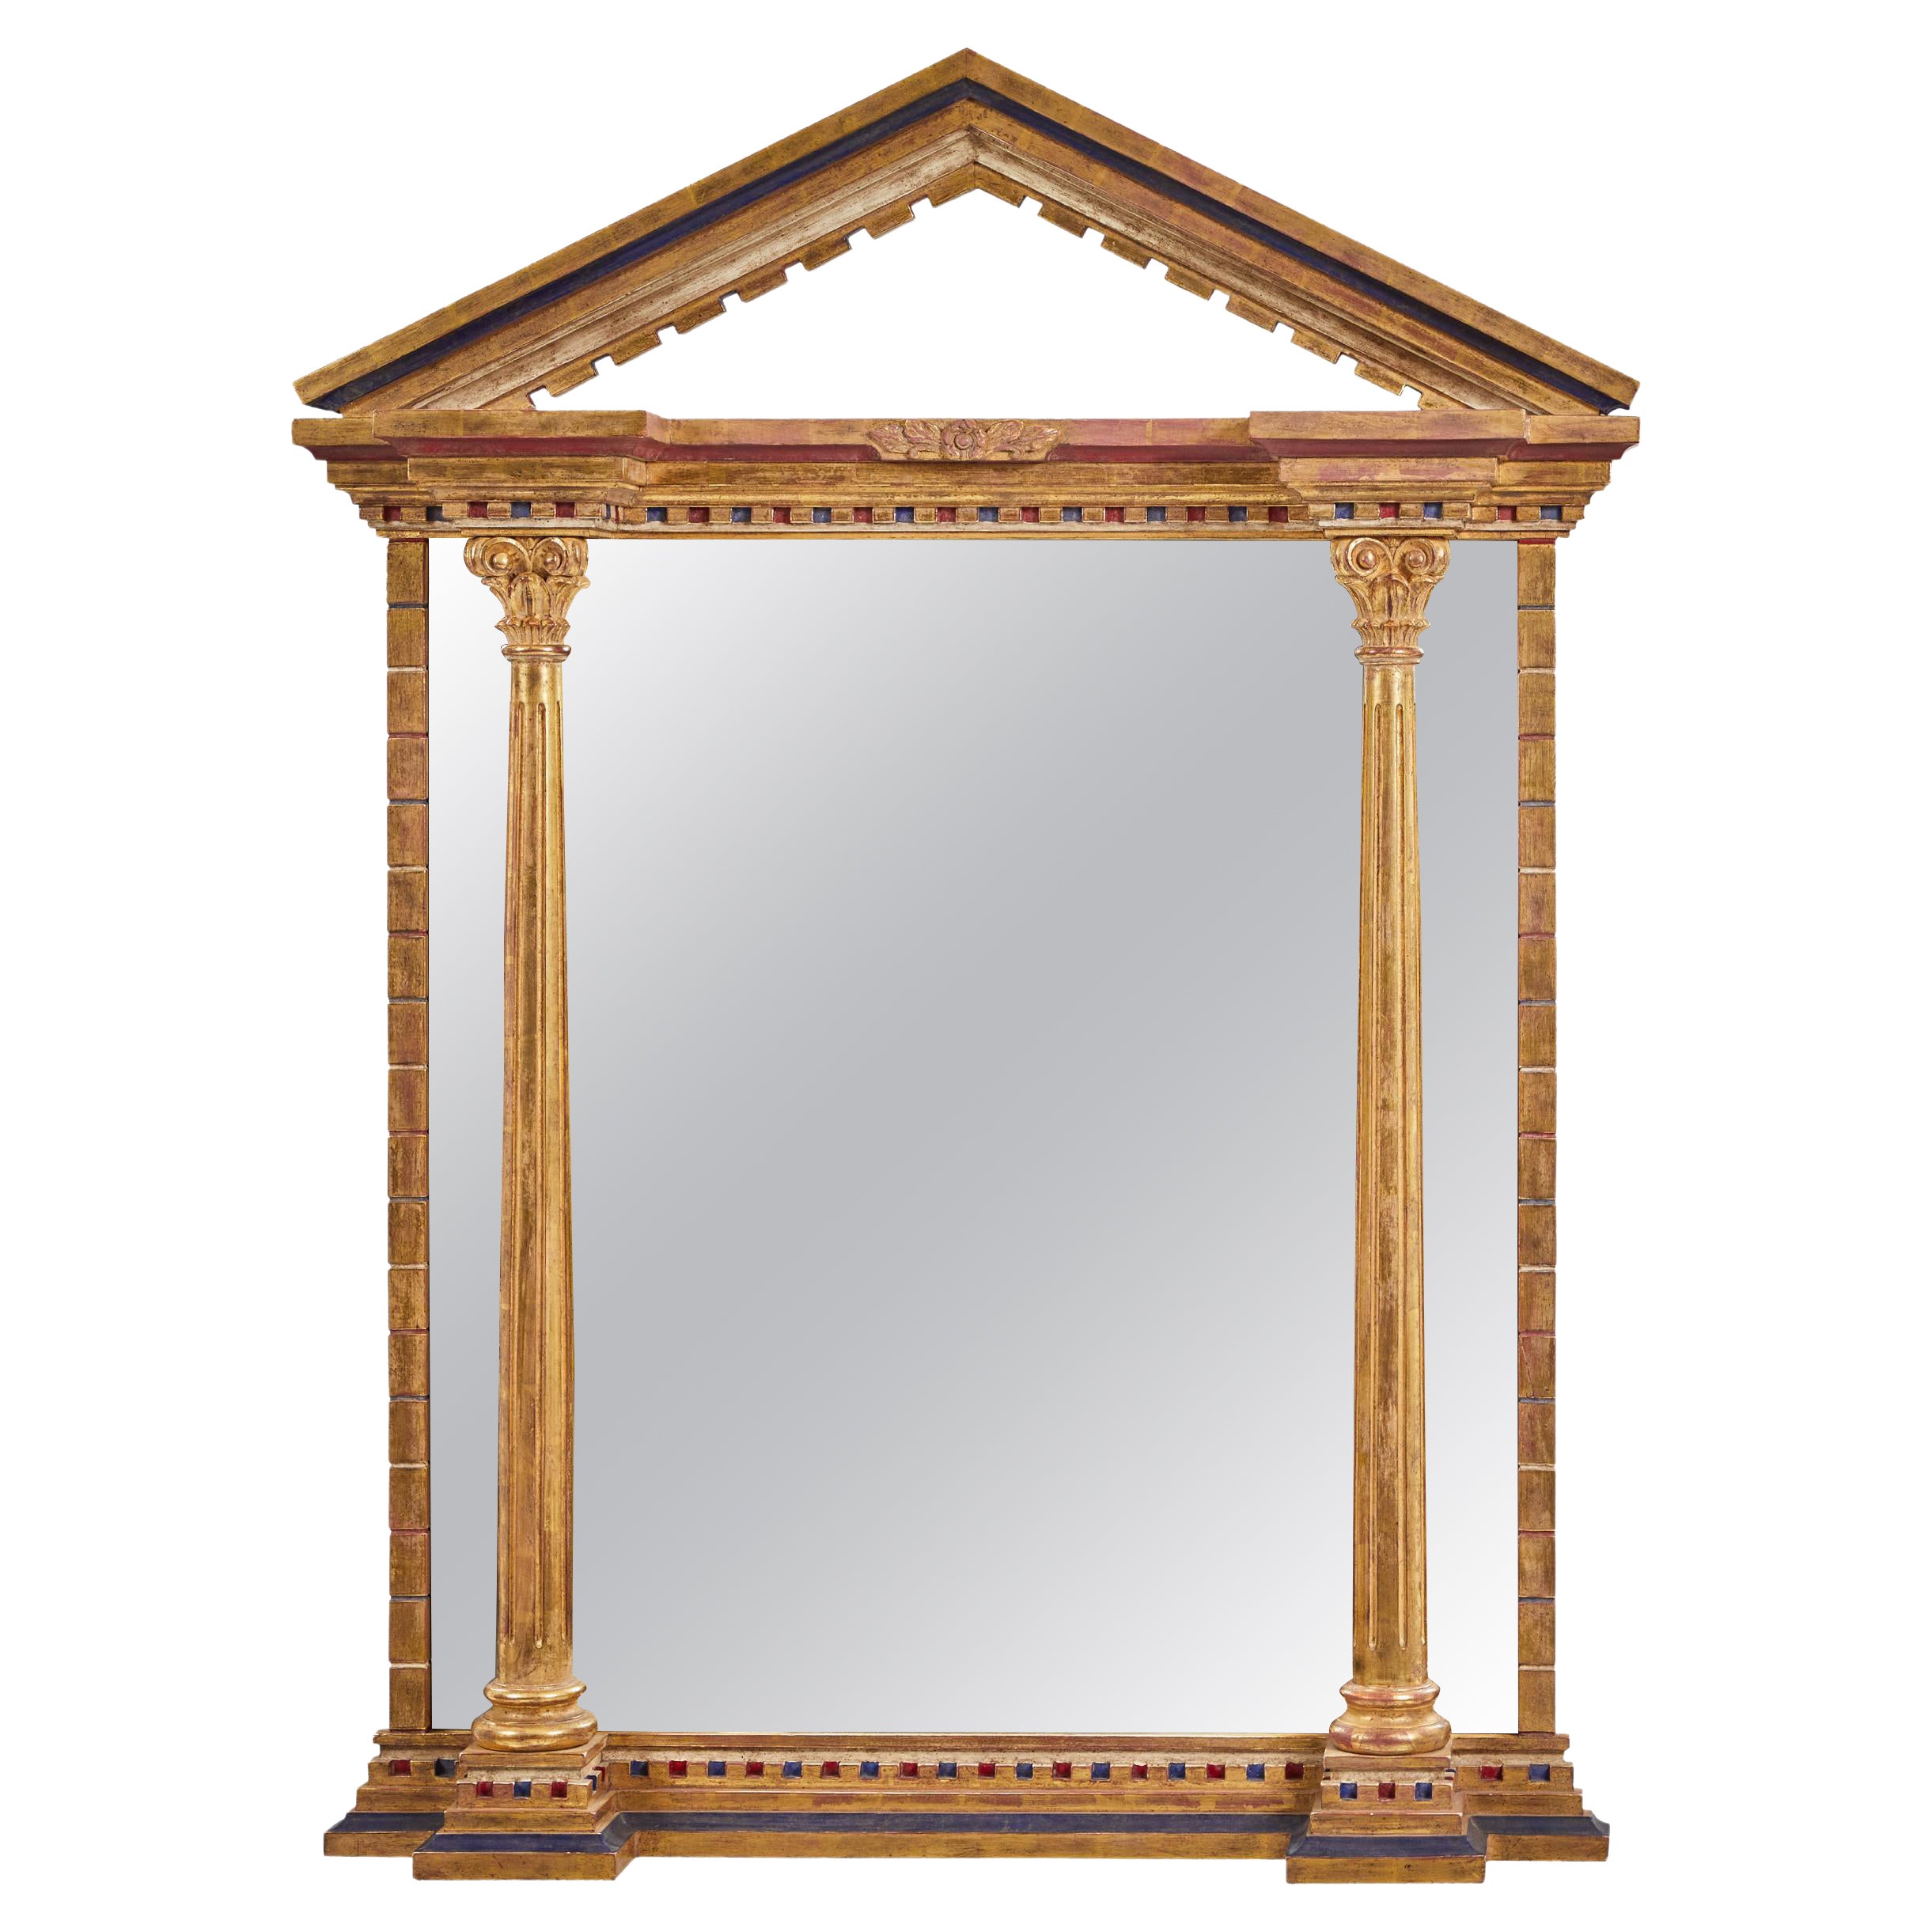 Large Gold Leaf and Polychromed Mirror with Pediment